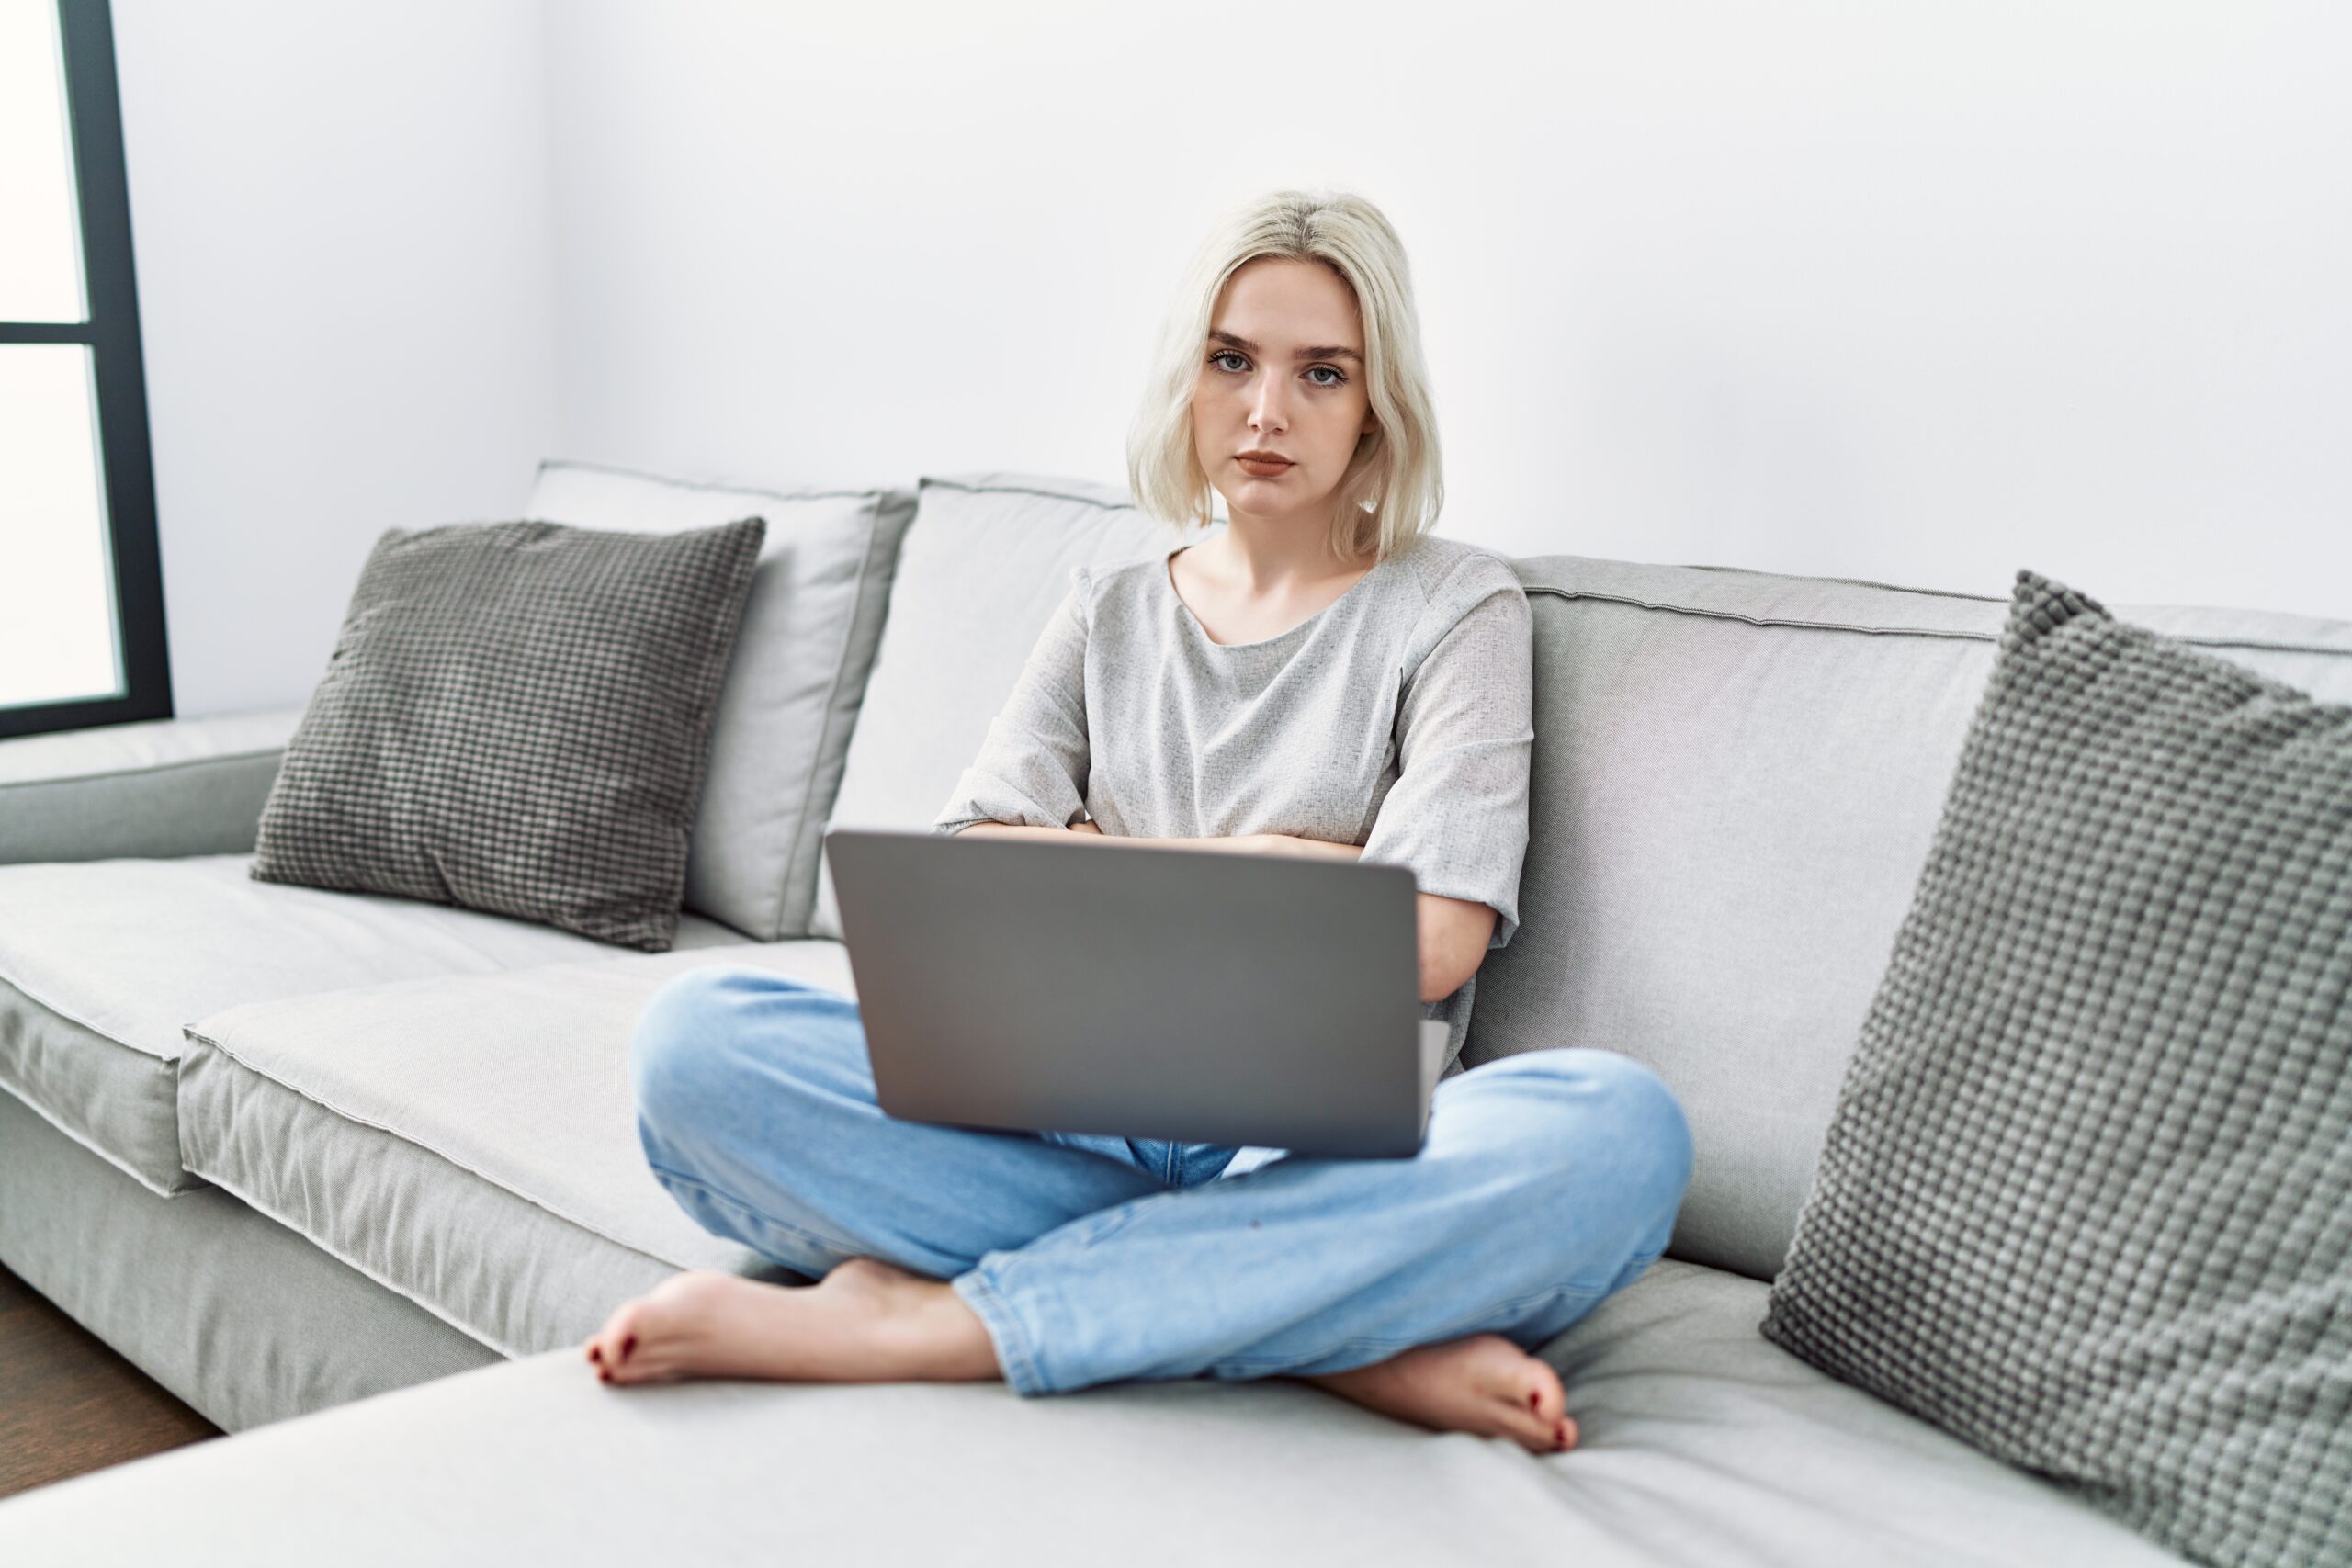 Young Caucasian woman using laptop at home sitting on the sofa with a disapproving expression on her face with crossed arms